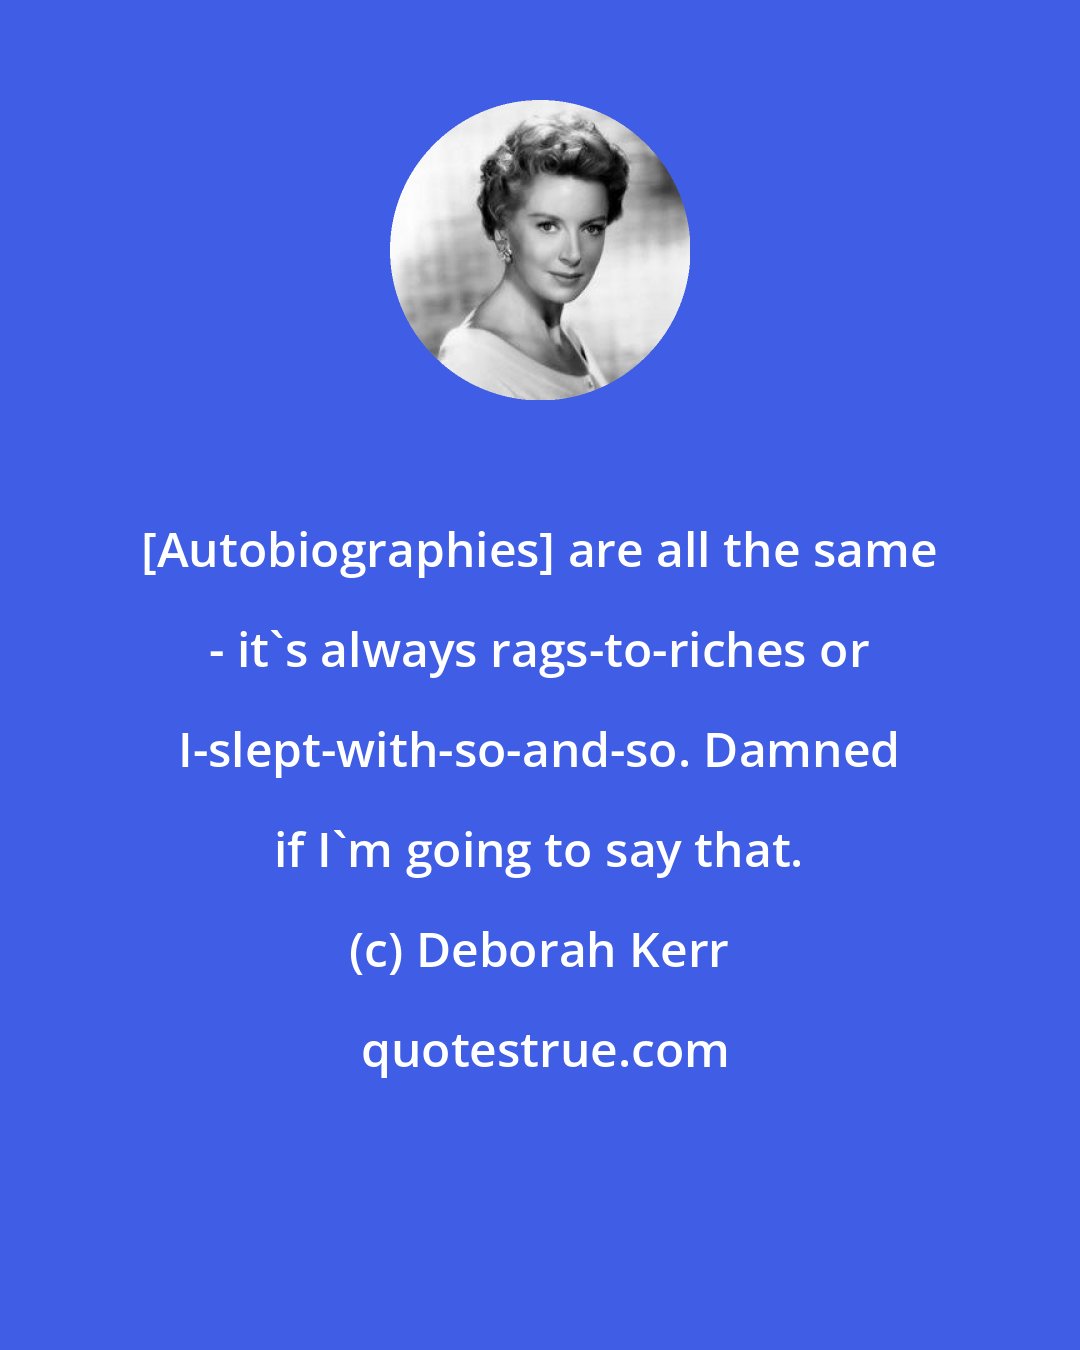 Deborah Kerr: [Autobiographies] are all the same - it's always rags-to-riches or I-slept-with-so-and-so. Damned if I'm going to say that.